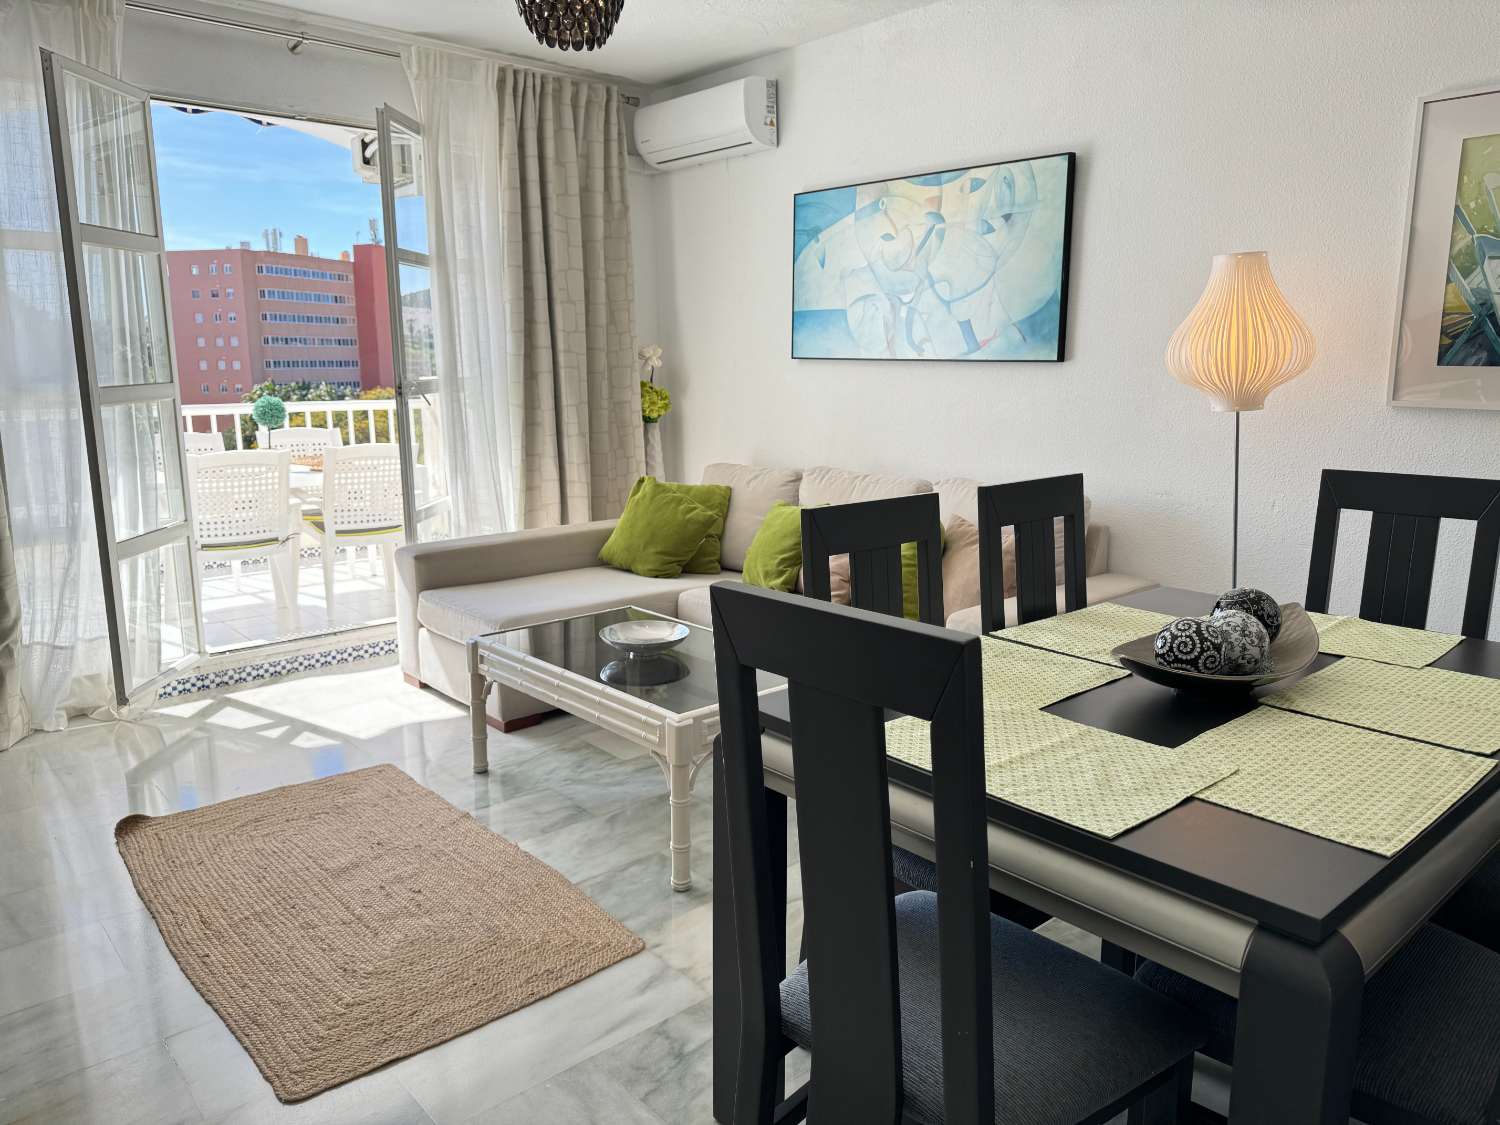 The climate, the sea and the location of this 3-bedroom house is ideal on Fuengirola Beach